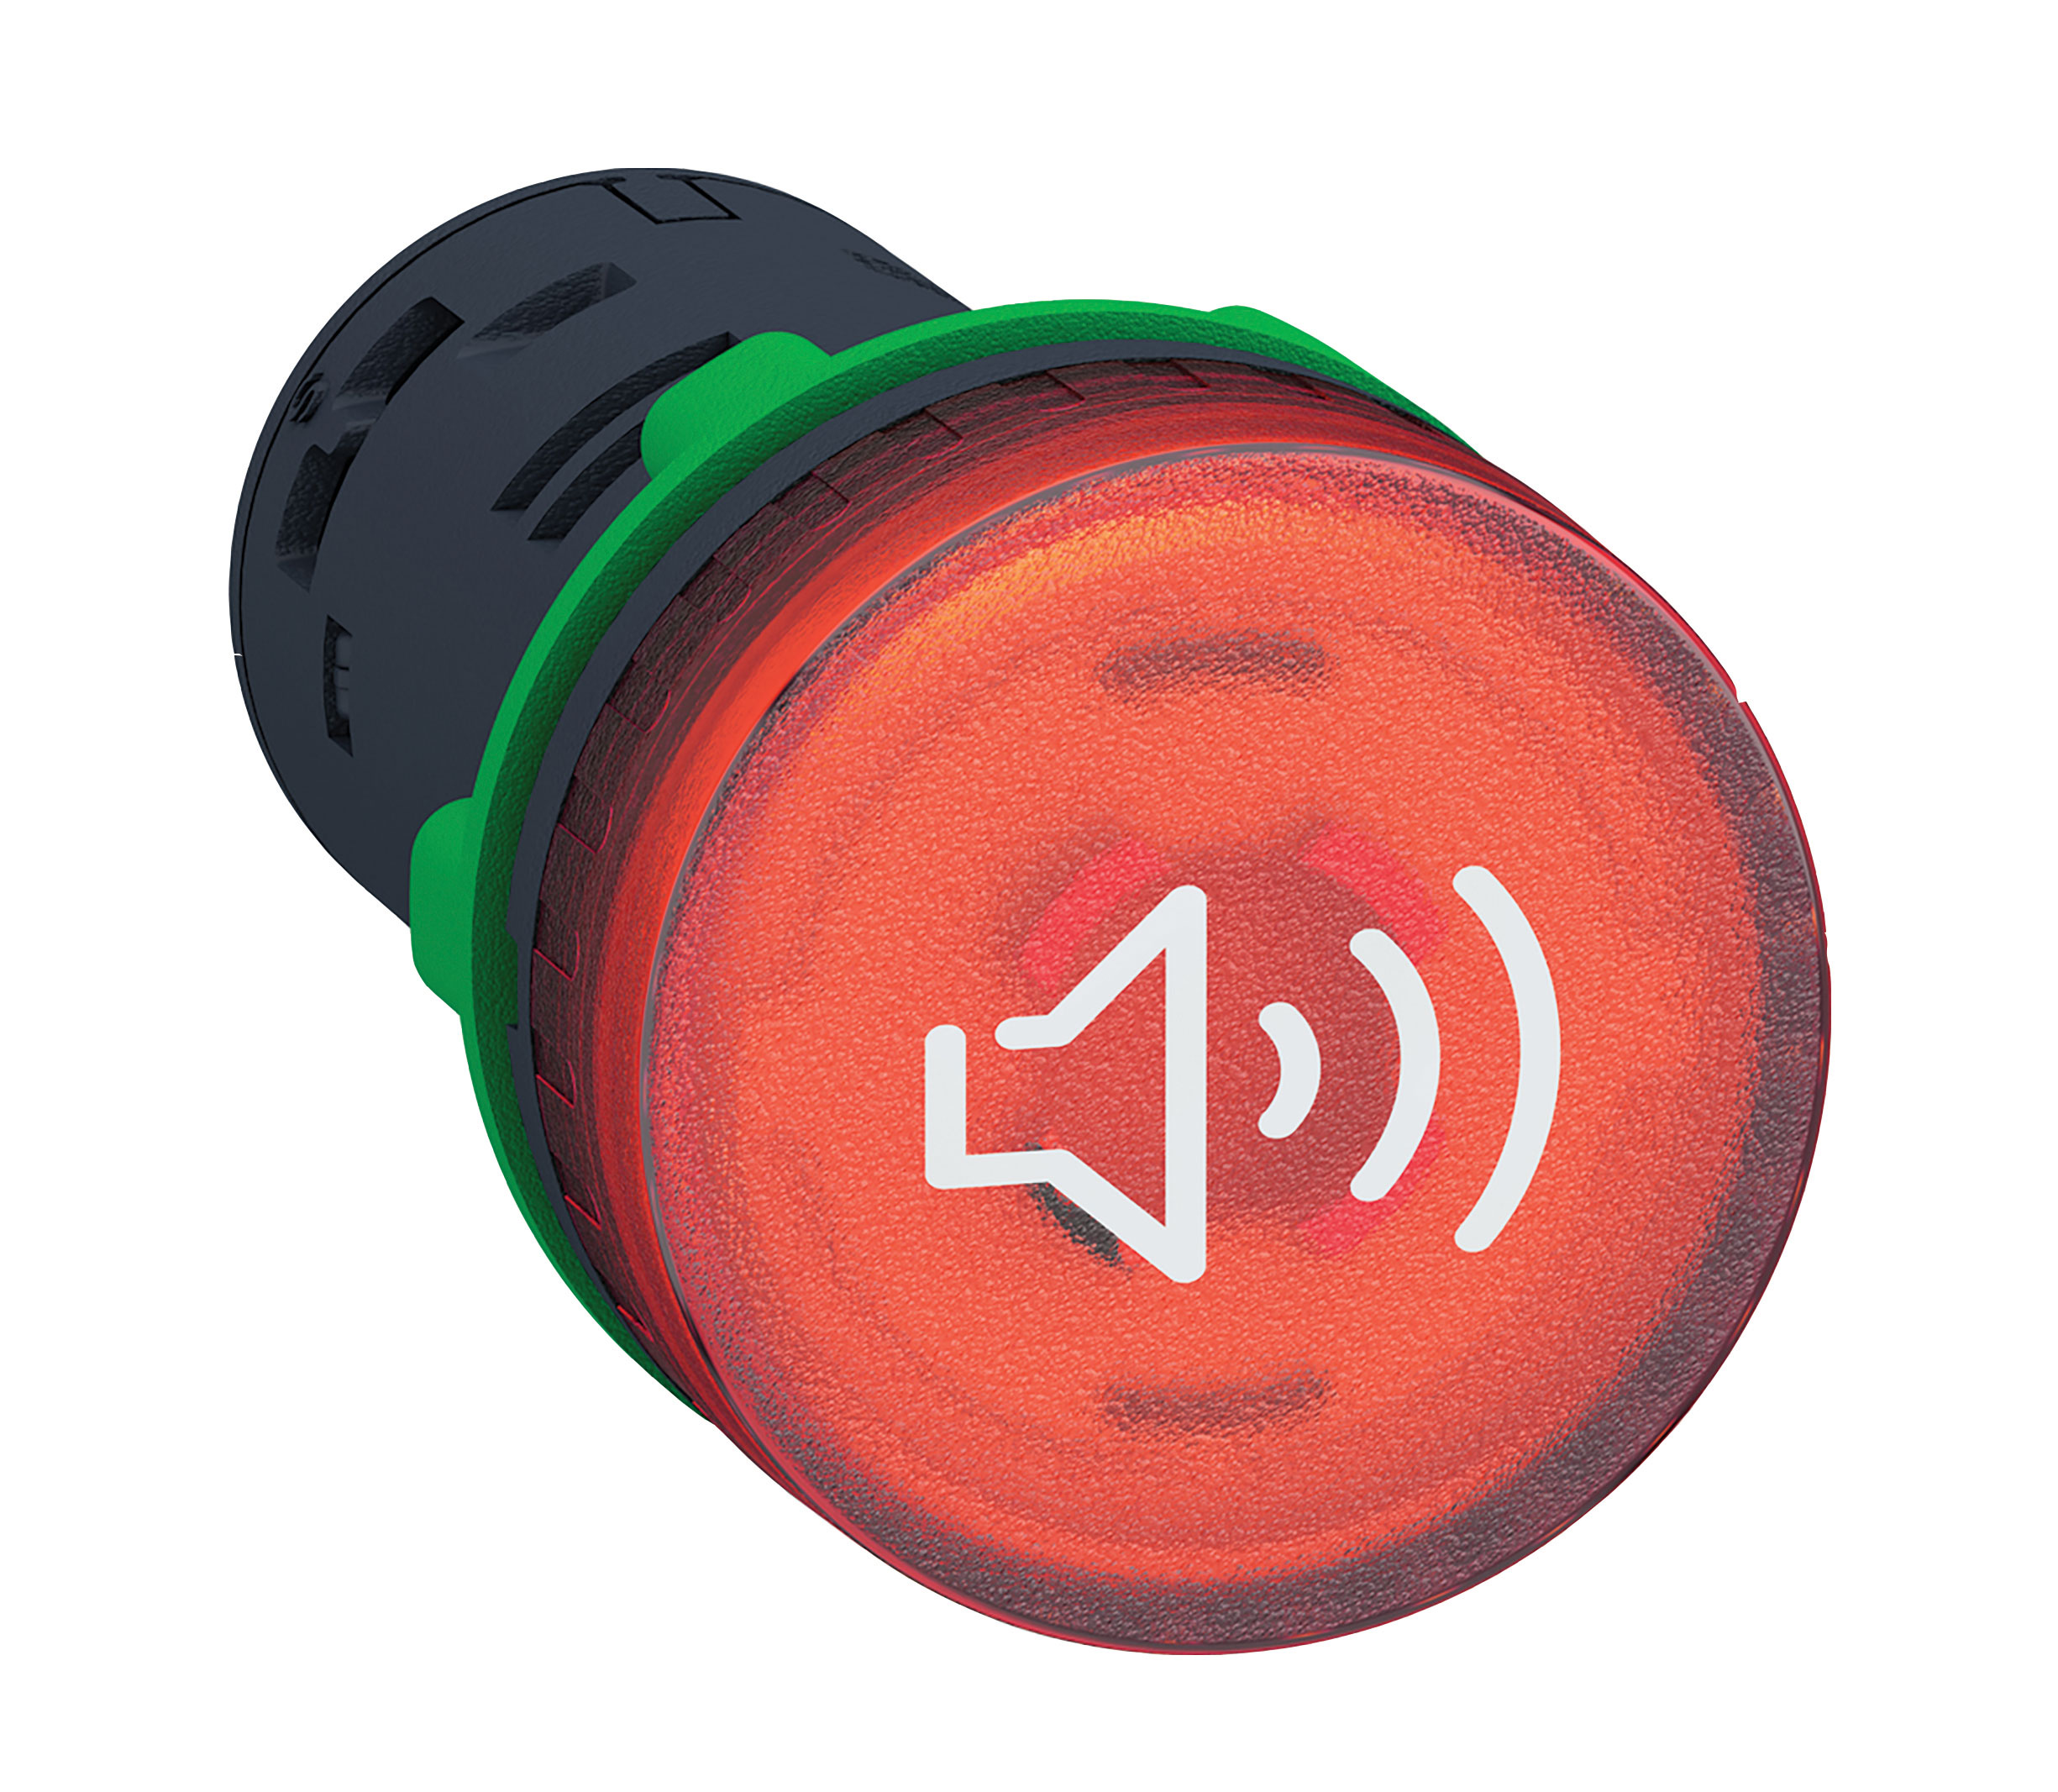 Green and orange buzzer with a sound icon. Image by Viking Electronic.